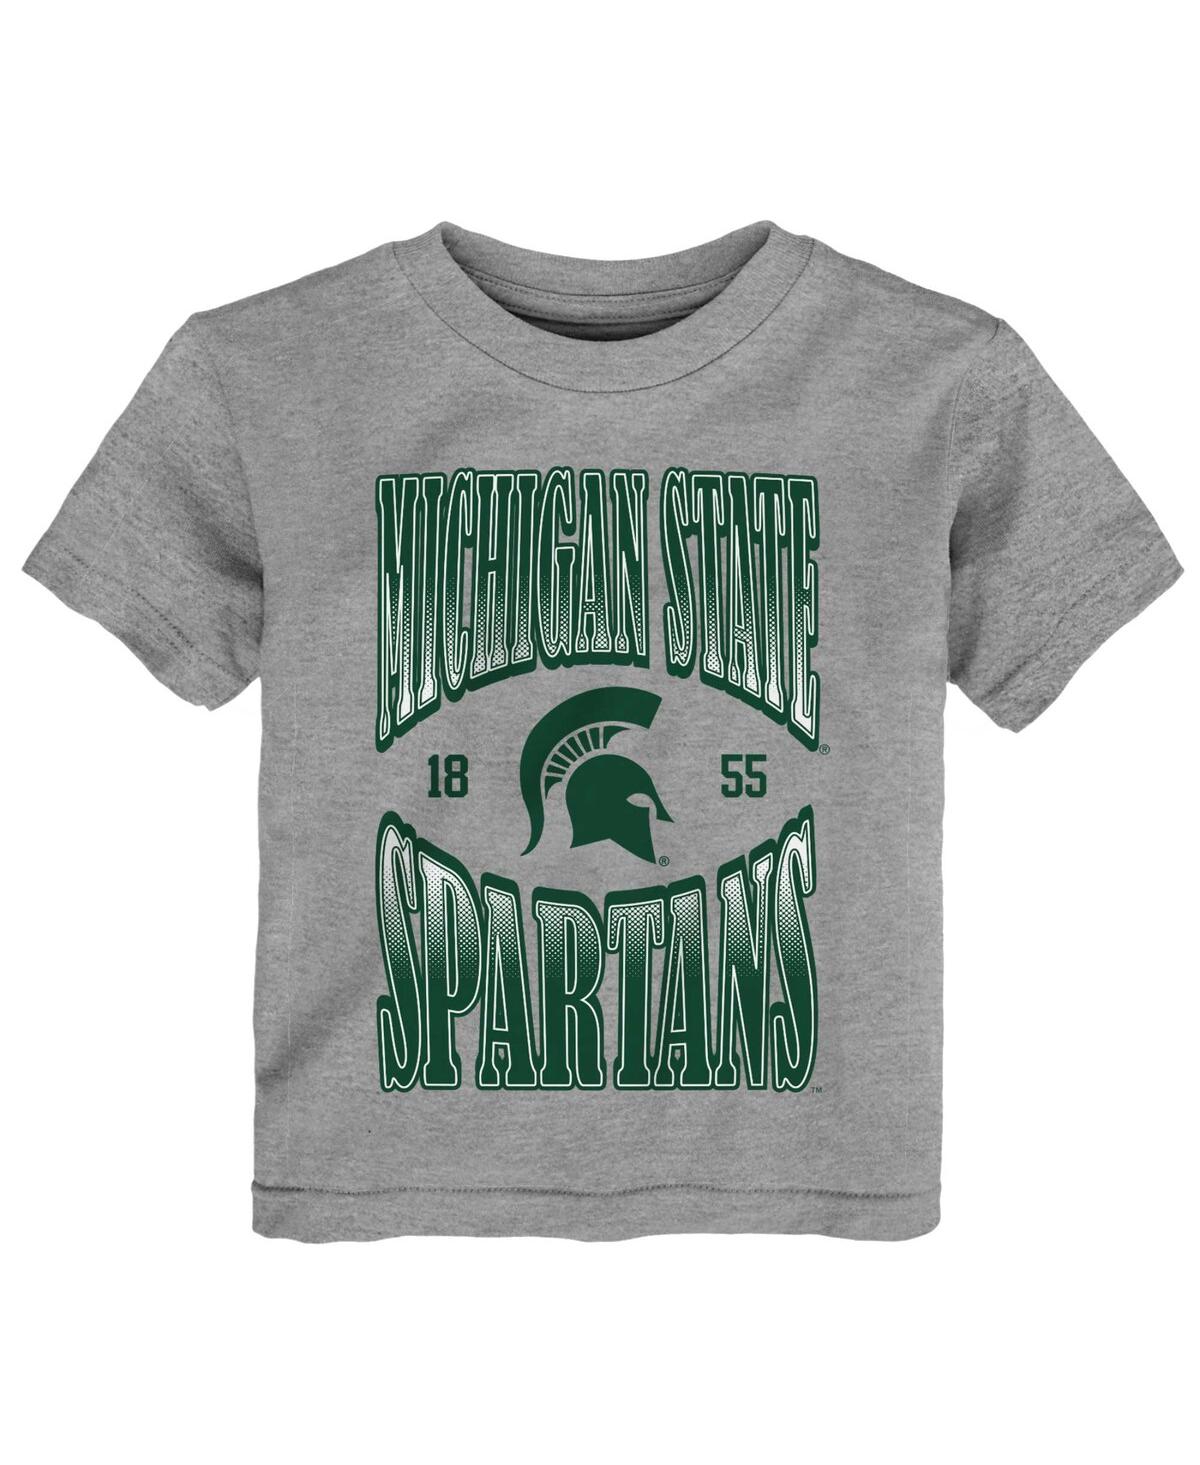 Outerstuff Babies' Toddler Boys And Girls Heather Gray Michigan State Spartans Top Class T-shirt